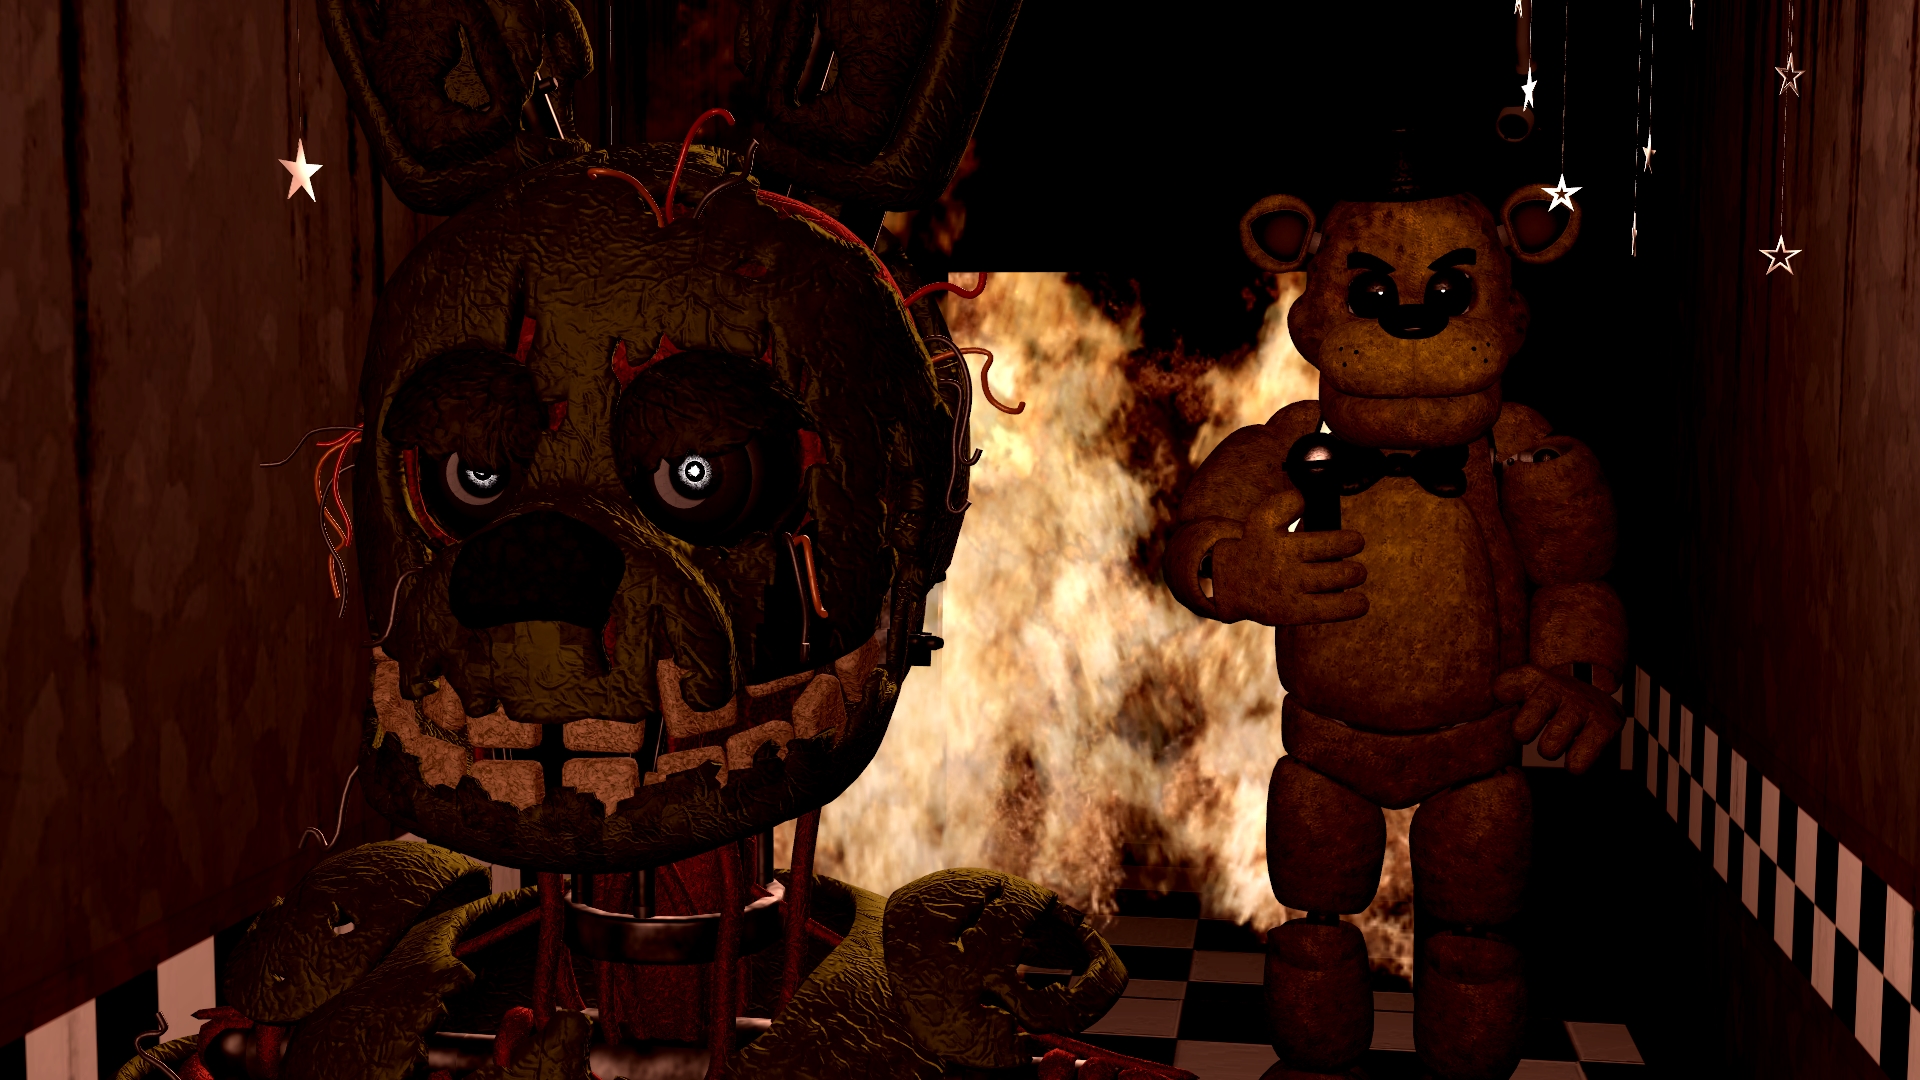 Gmod A Golden Freddy And Springtrap Just For The Season